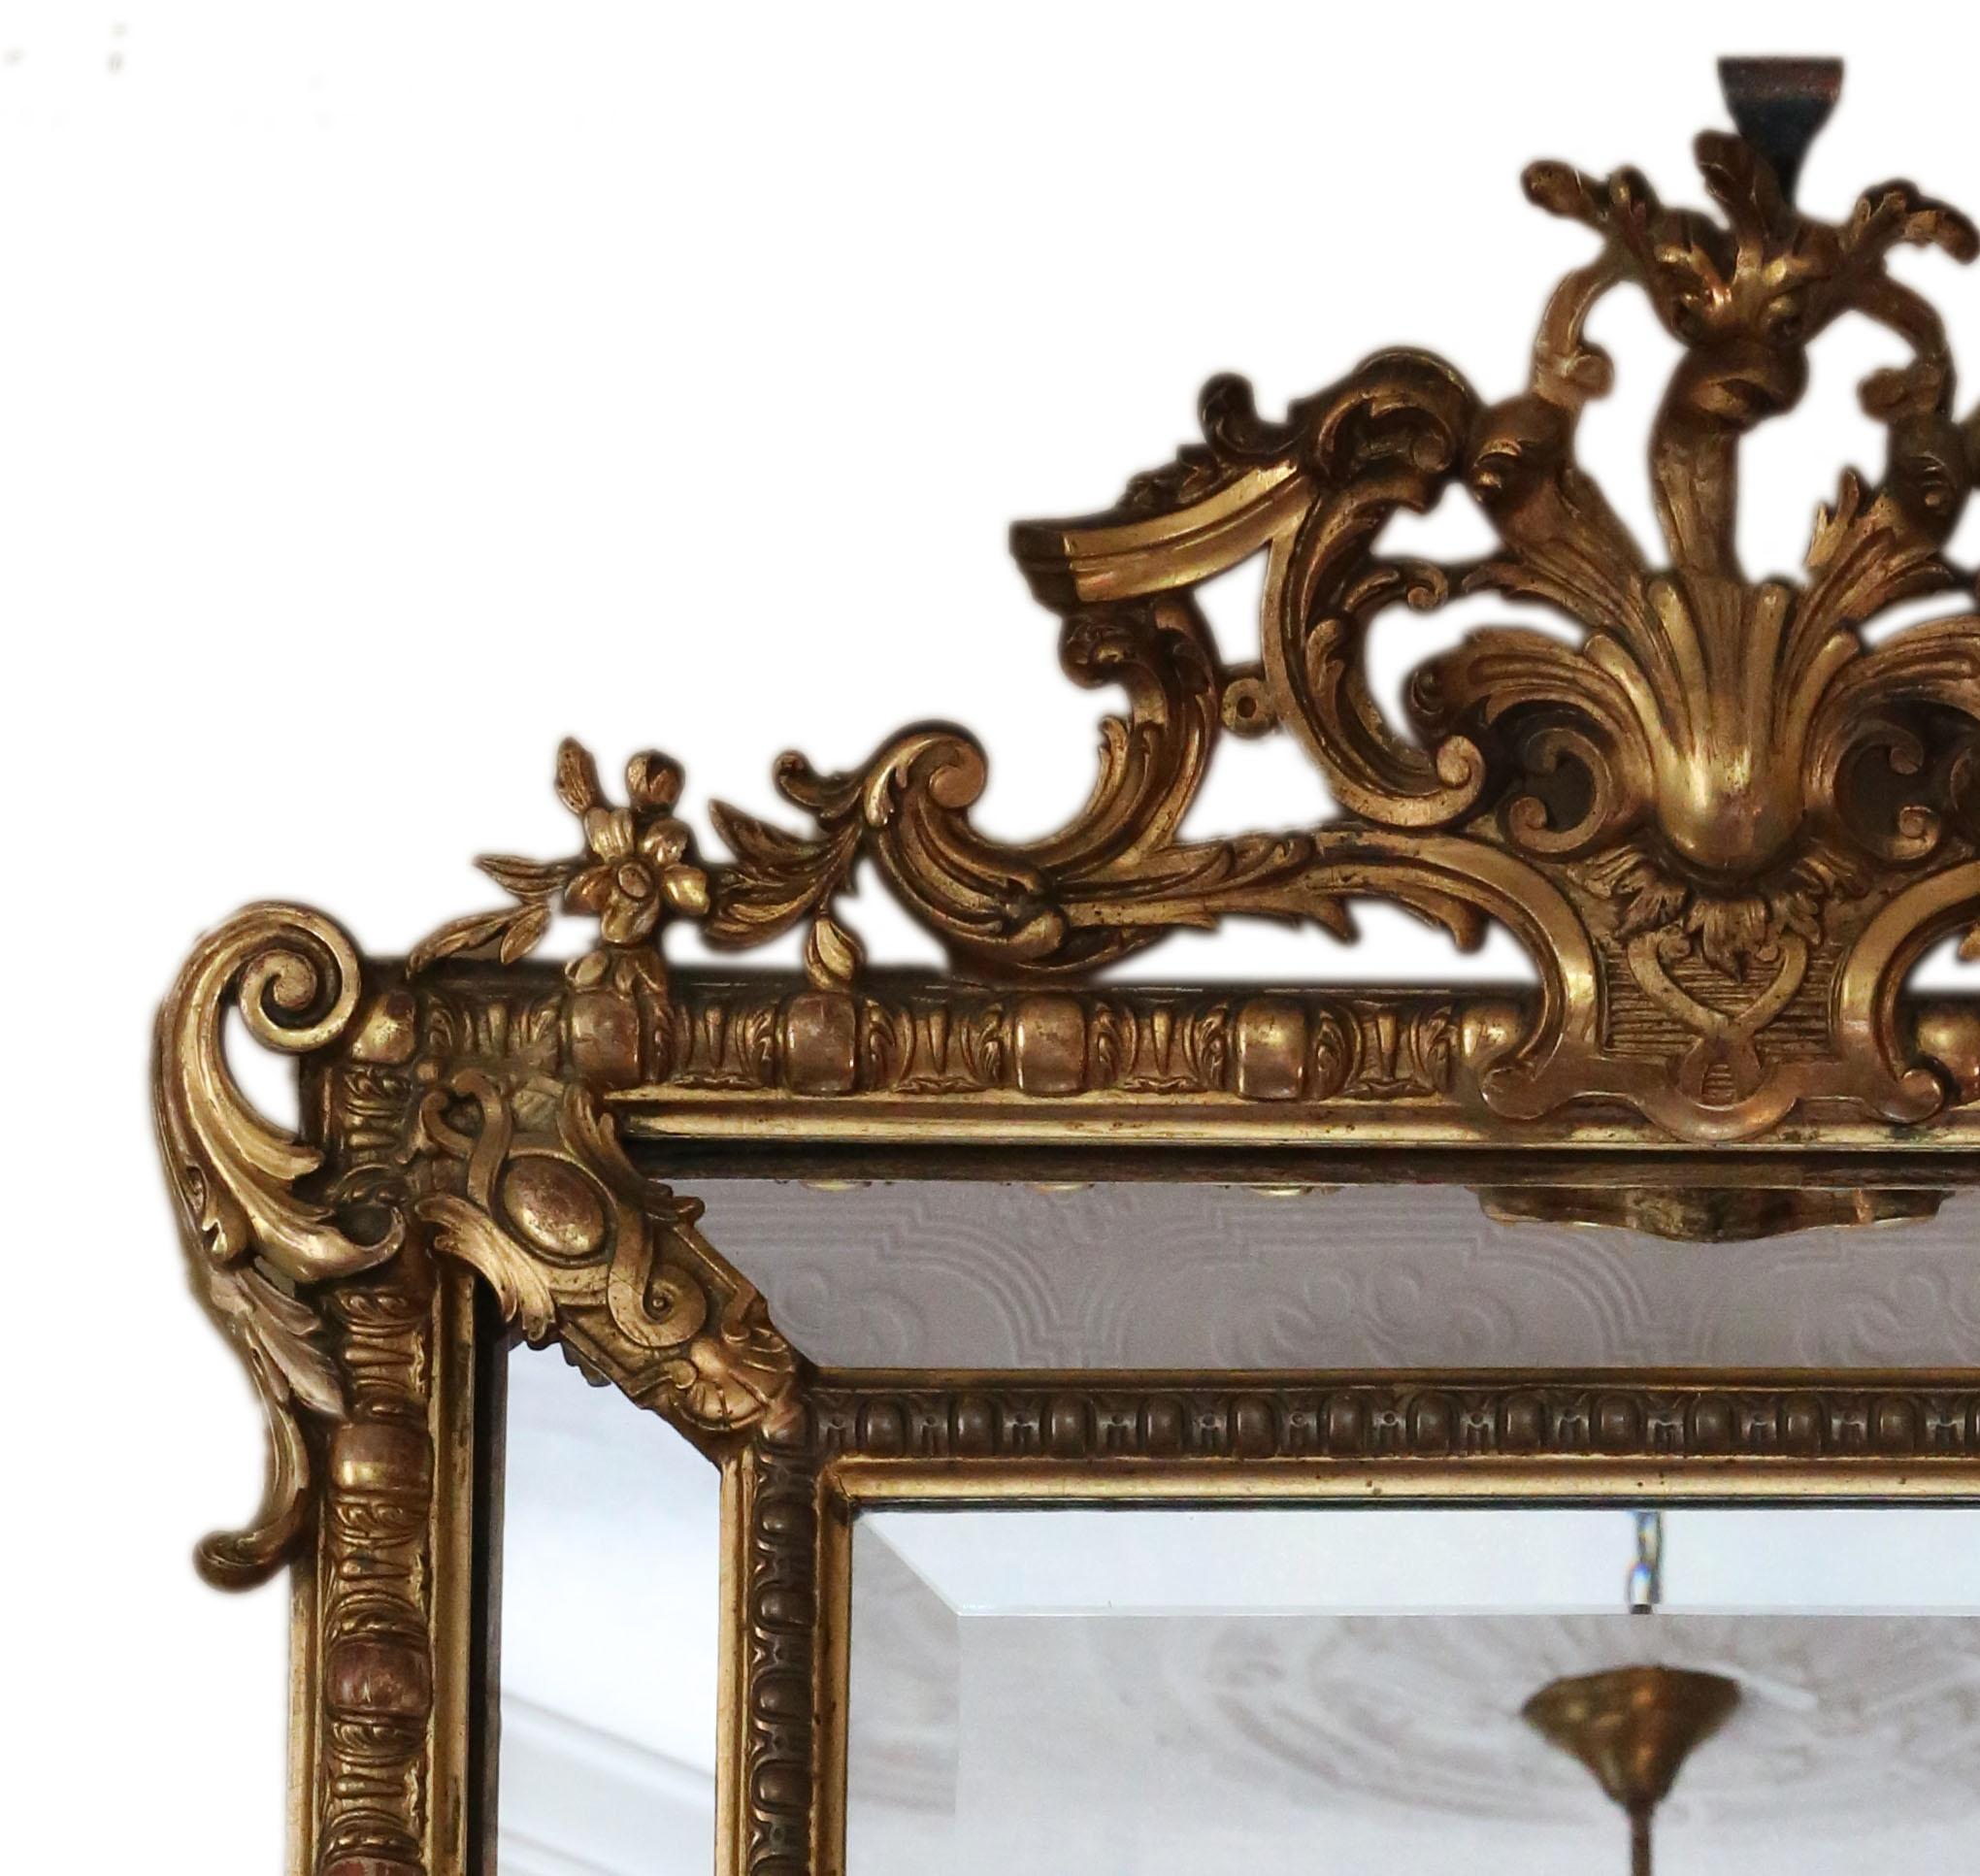 Antique large fine quality decorative gilt cushion overmantle wall mirror, 19th Century.

An impressive rare find, that would look amazing in the right location. No loose joints or woodworm.

The main bevel edge mirrored glass has light